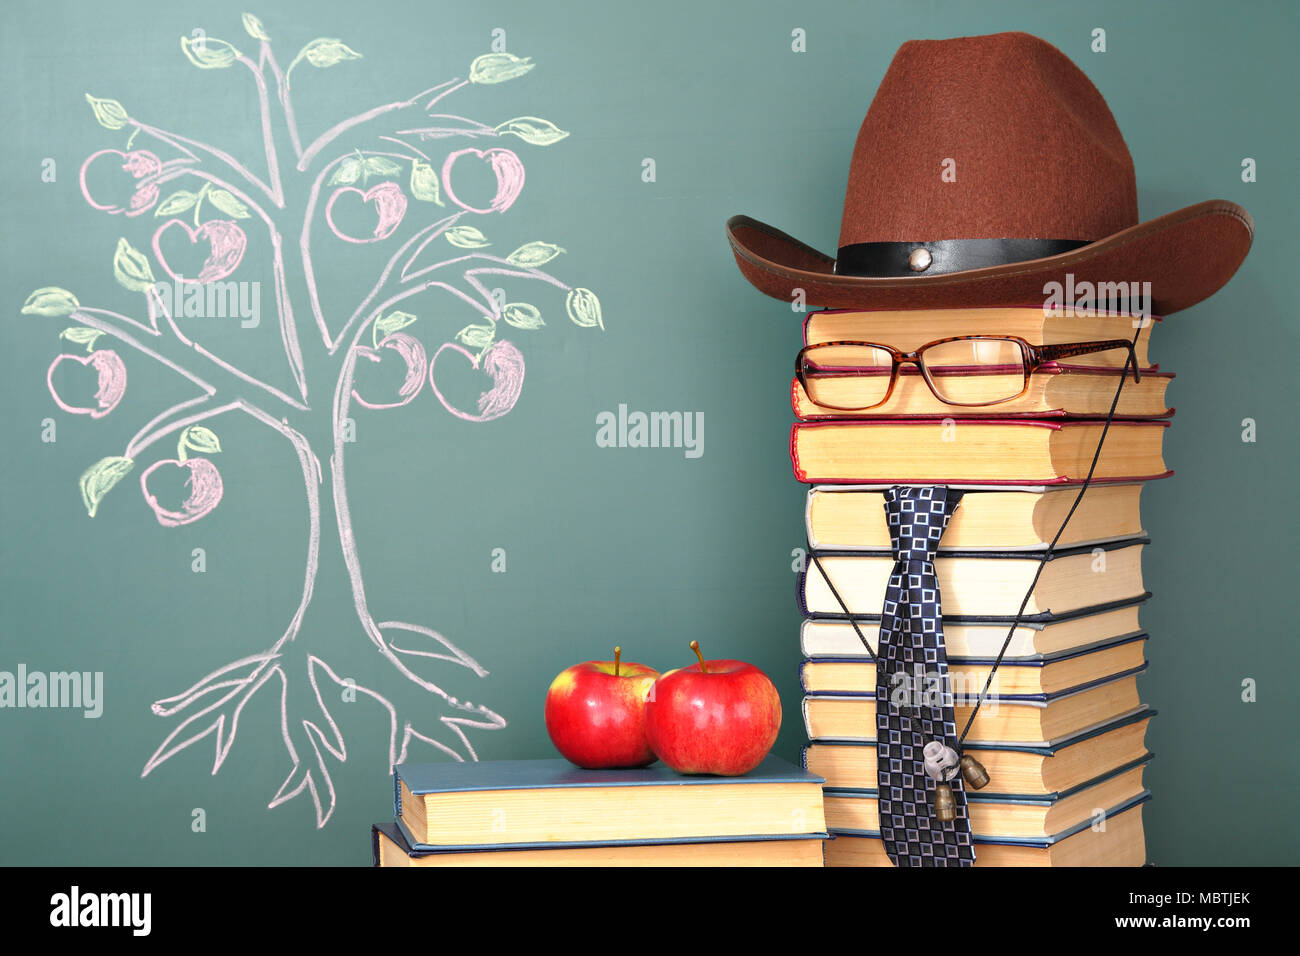 Tree of knowledge education concept with unusual teacher Stock Photo